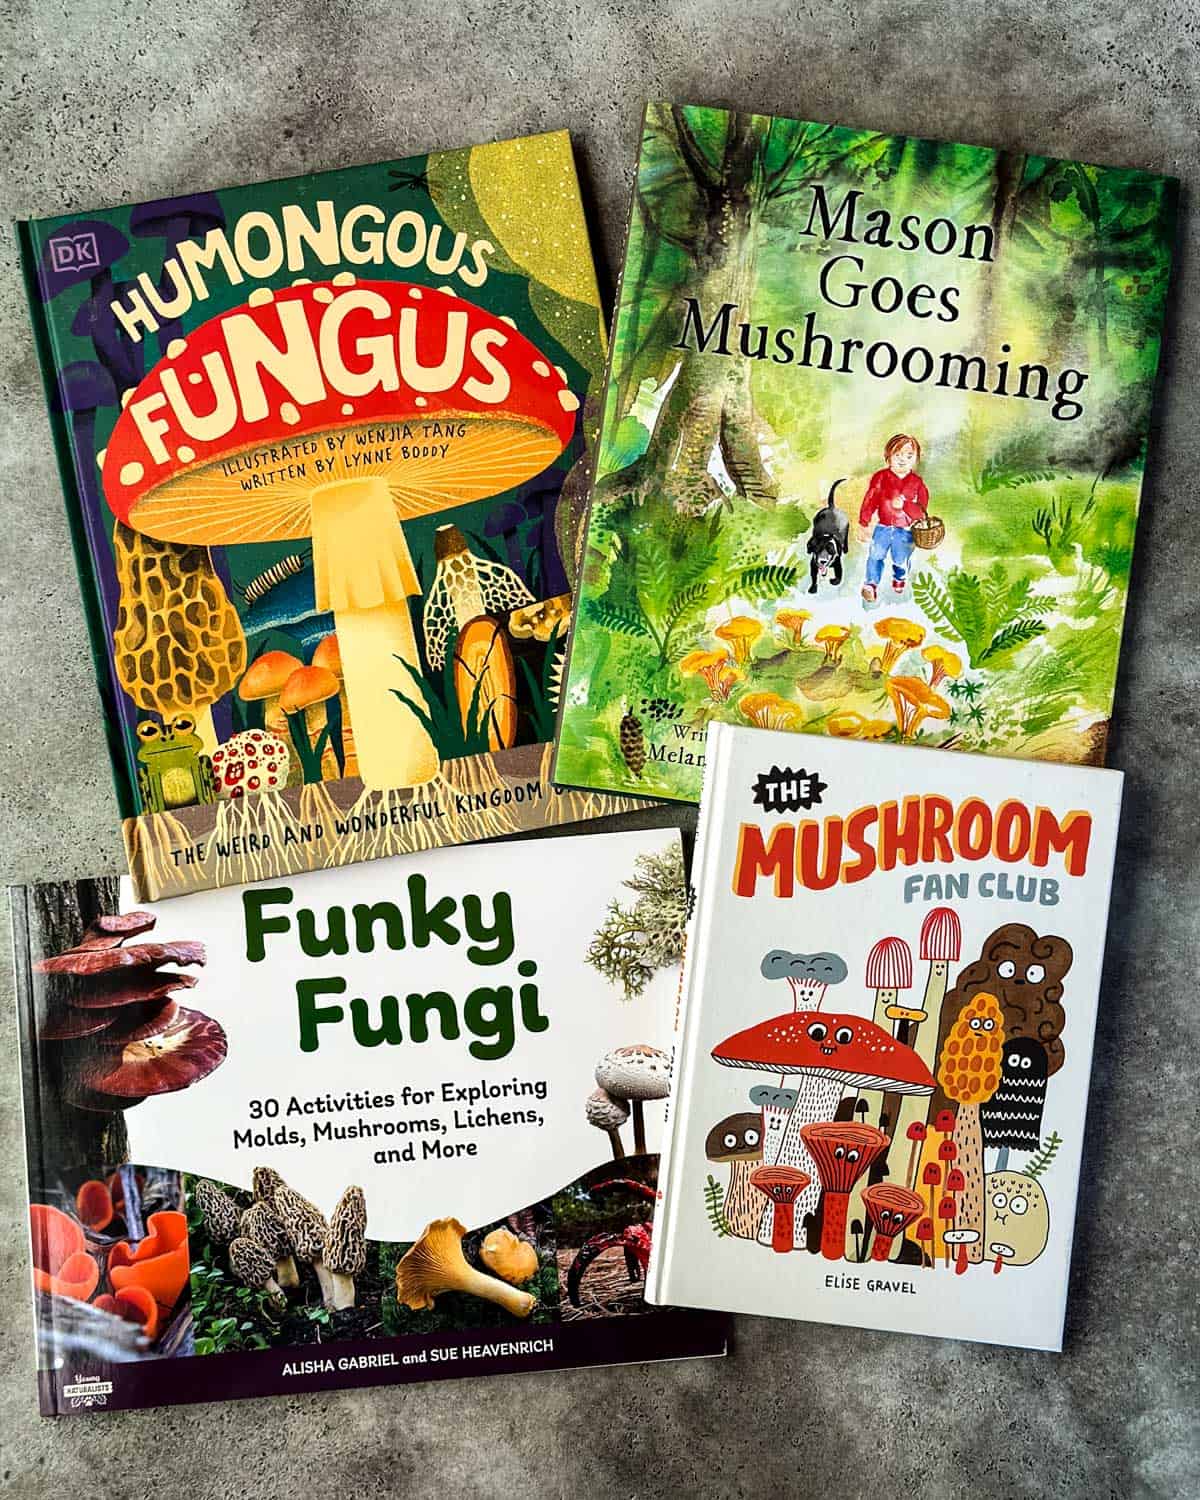 4 mushroom foraging books for kids face up on a gray surface.